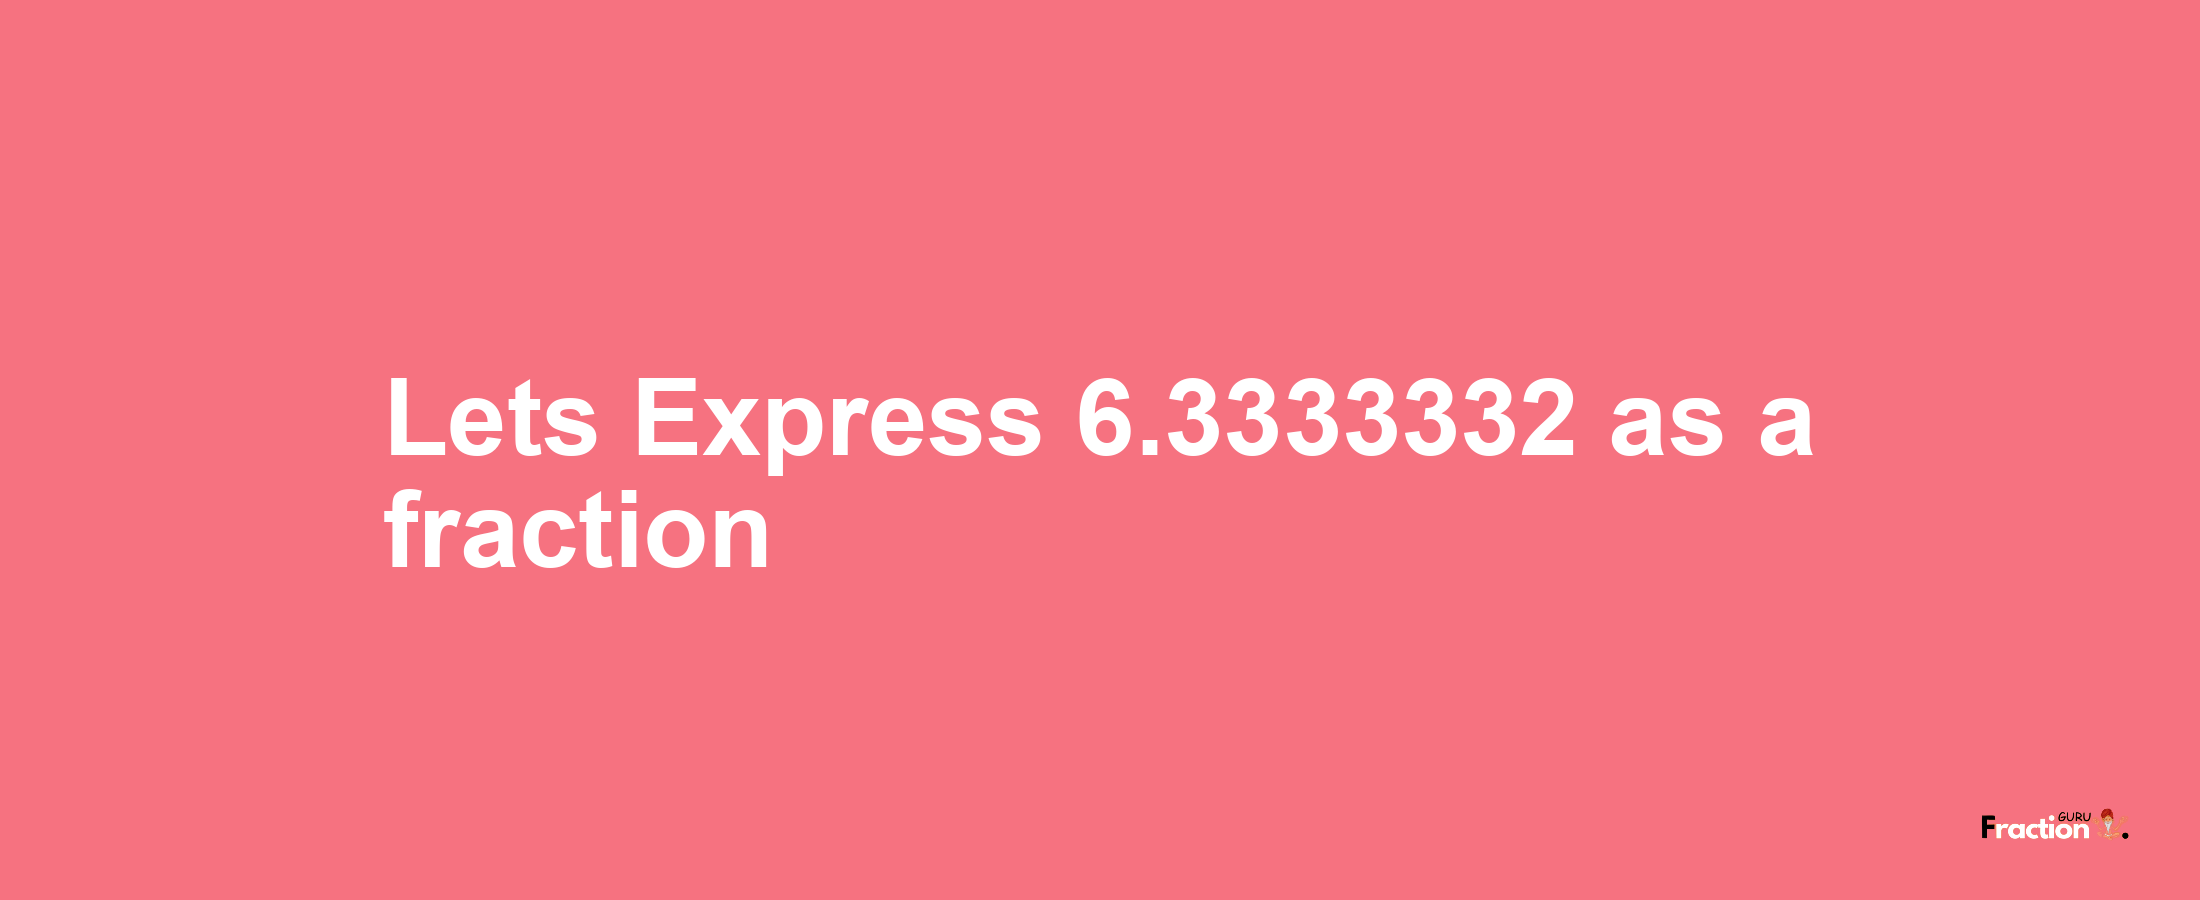 Lets Express 6.3333332 as afraction